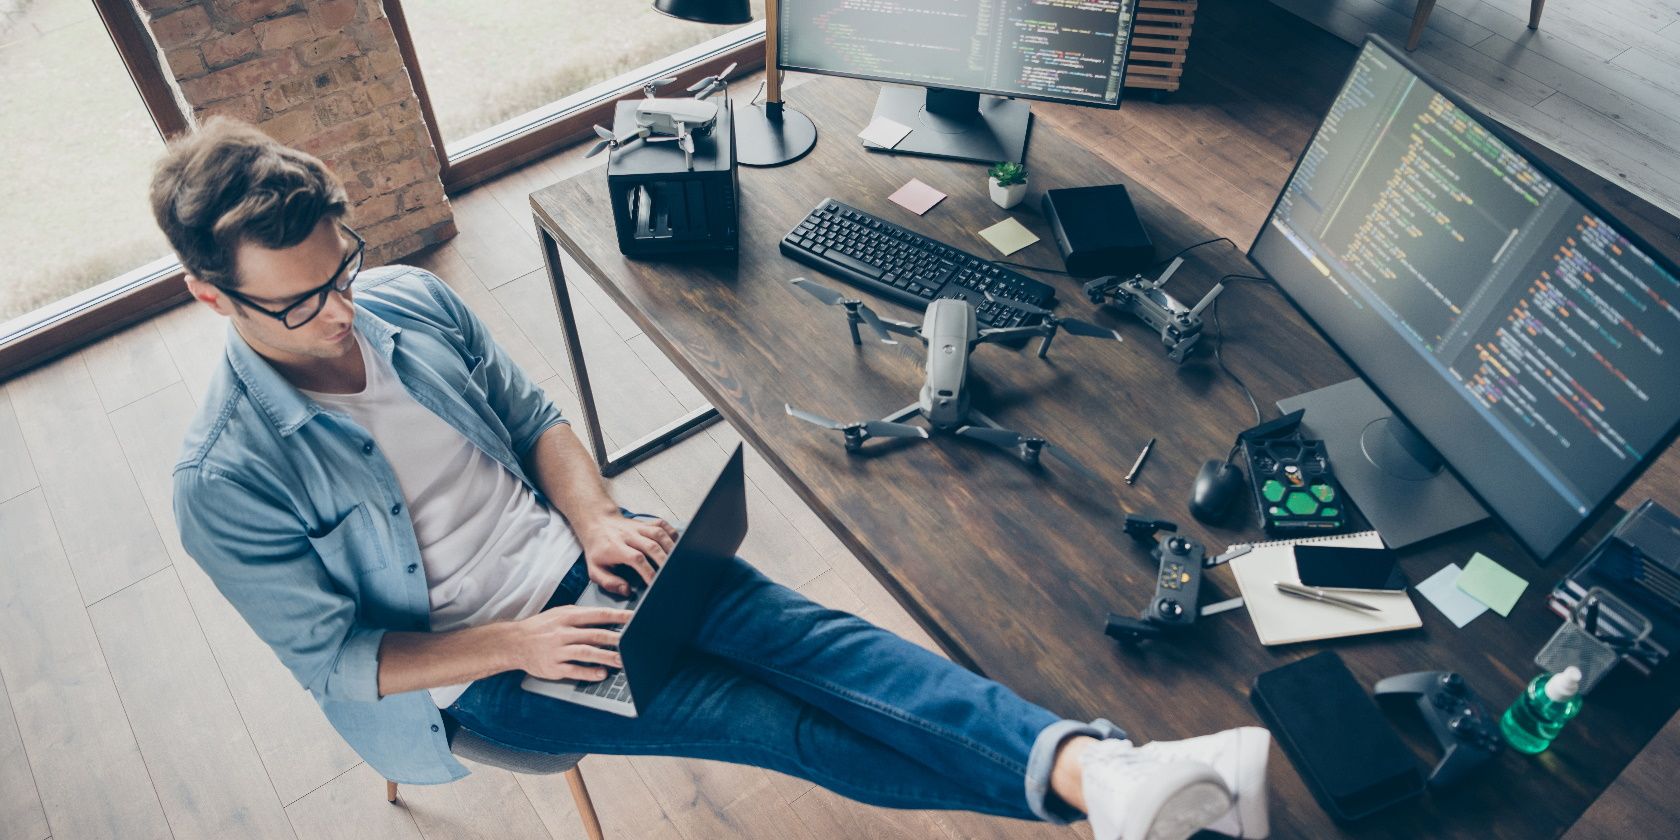 Top above high angle view of his he nice attractive focused skilled guy geek typing coding web development remote support security safety at modern loft industrial home office work place station